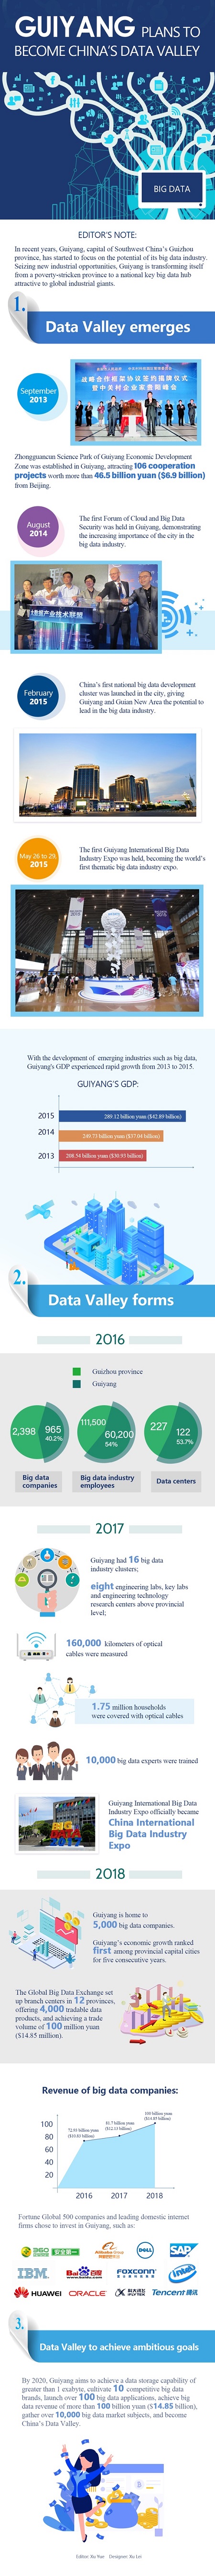 Guiyang plans to become China's Data Valley